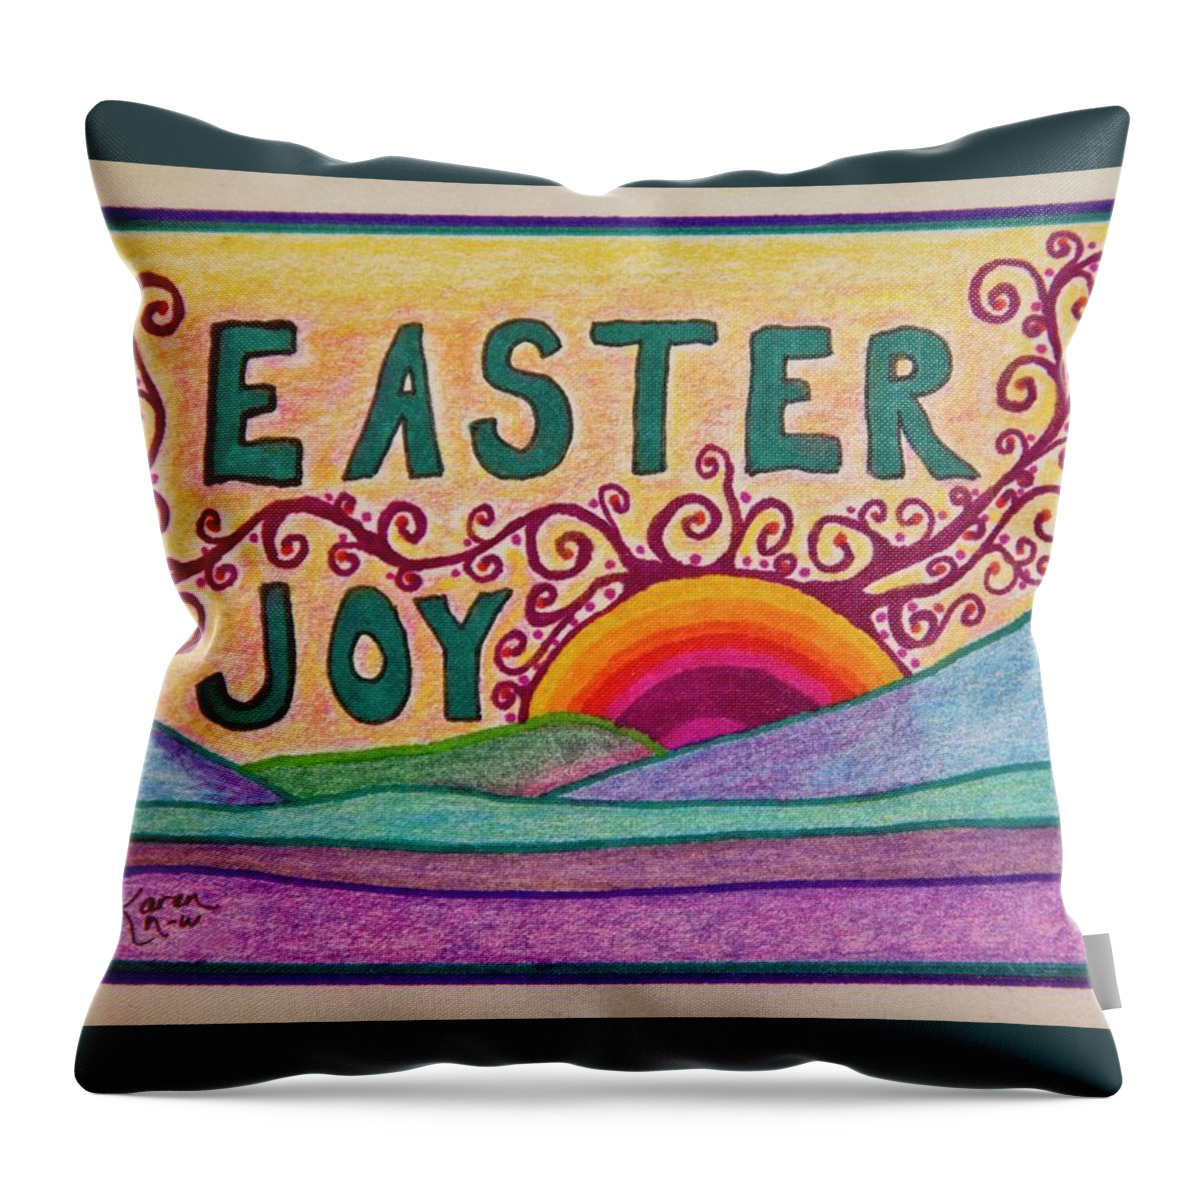 Easter Throw Pillow featuring the drawing Easter Joy by Karen Nice-Webb